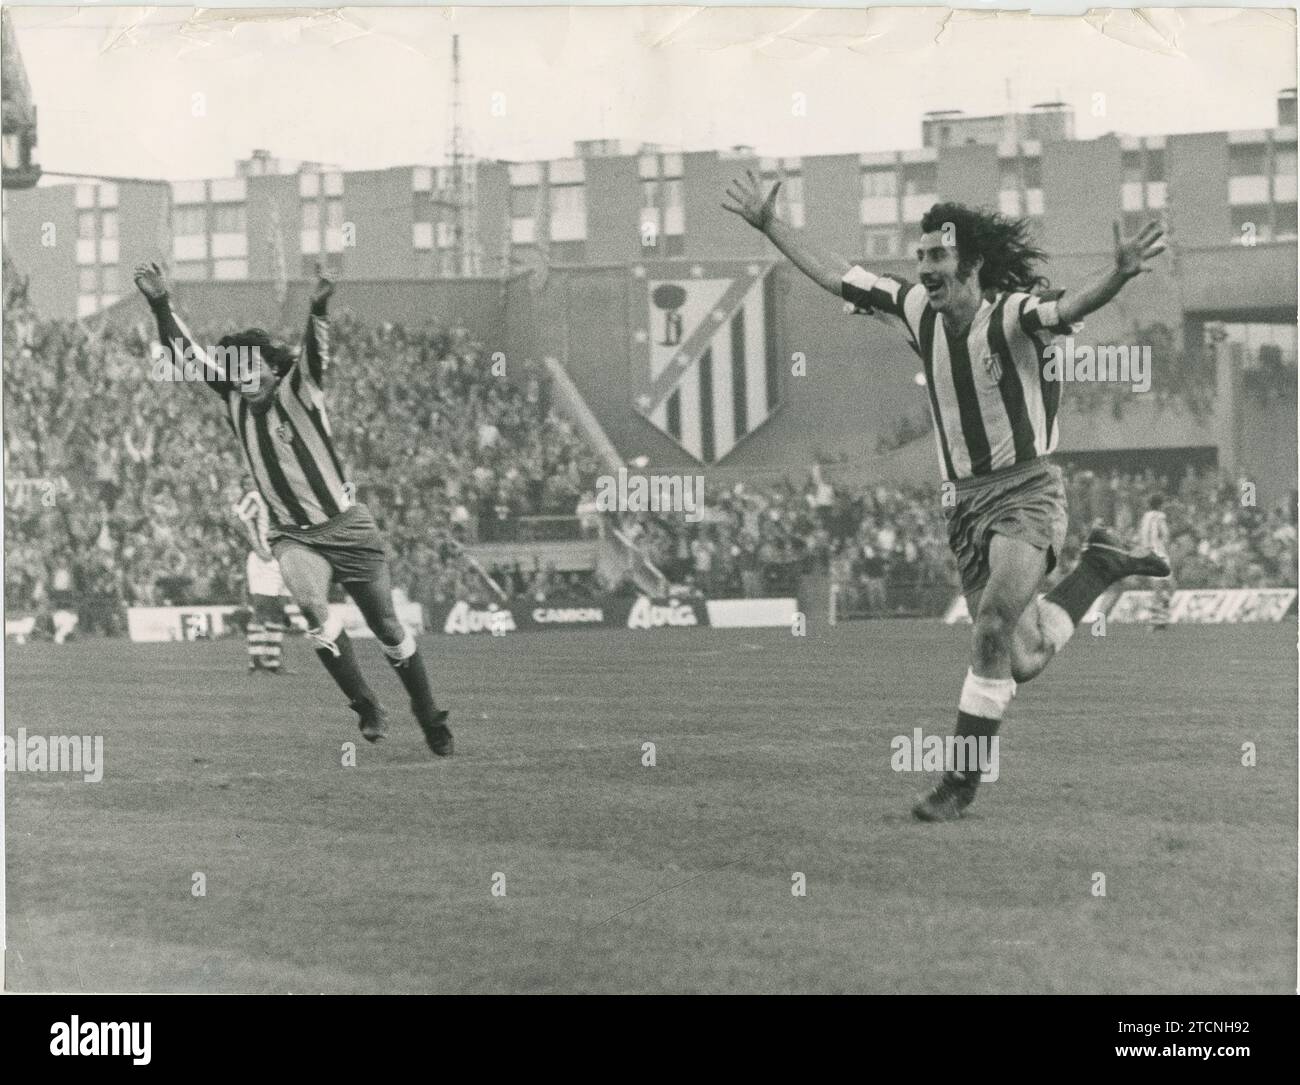 Madrid, 10/28/1973. League match played at the Vicente Calderón stadium, between Atlético de Madrid and Real Sociedad, which ended with the local victory by 5 to 1. In the image, Ayala celebrates the first goal, behind Becerra, runs to congratulate him. Credit: Album / Archivo ABC Stock Photo